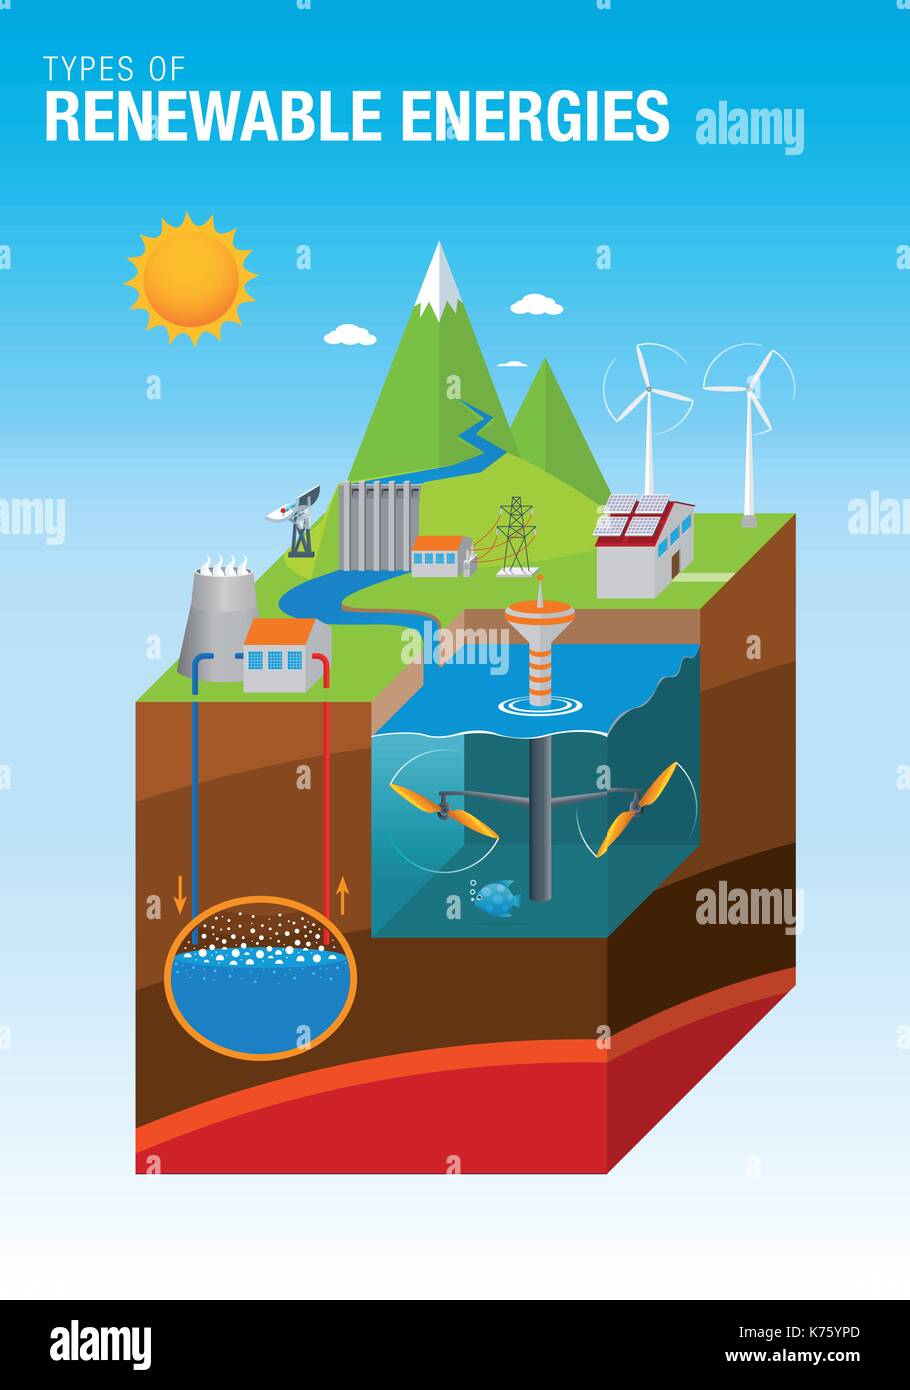 Types Of Renewable Energies The Graphic Contains Tidal Solar